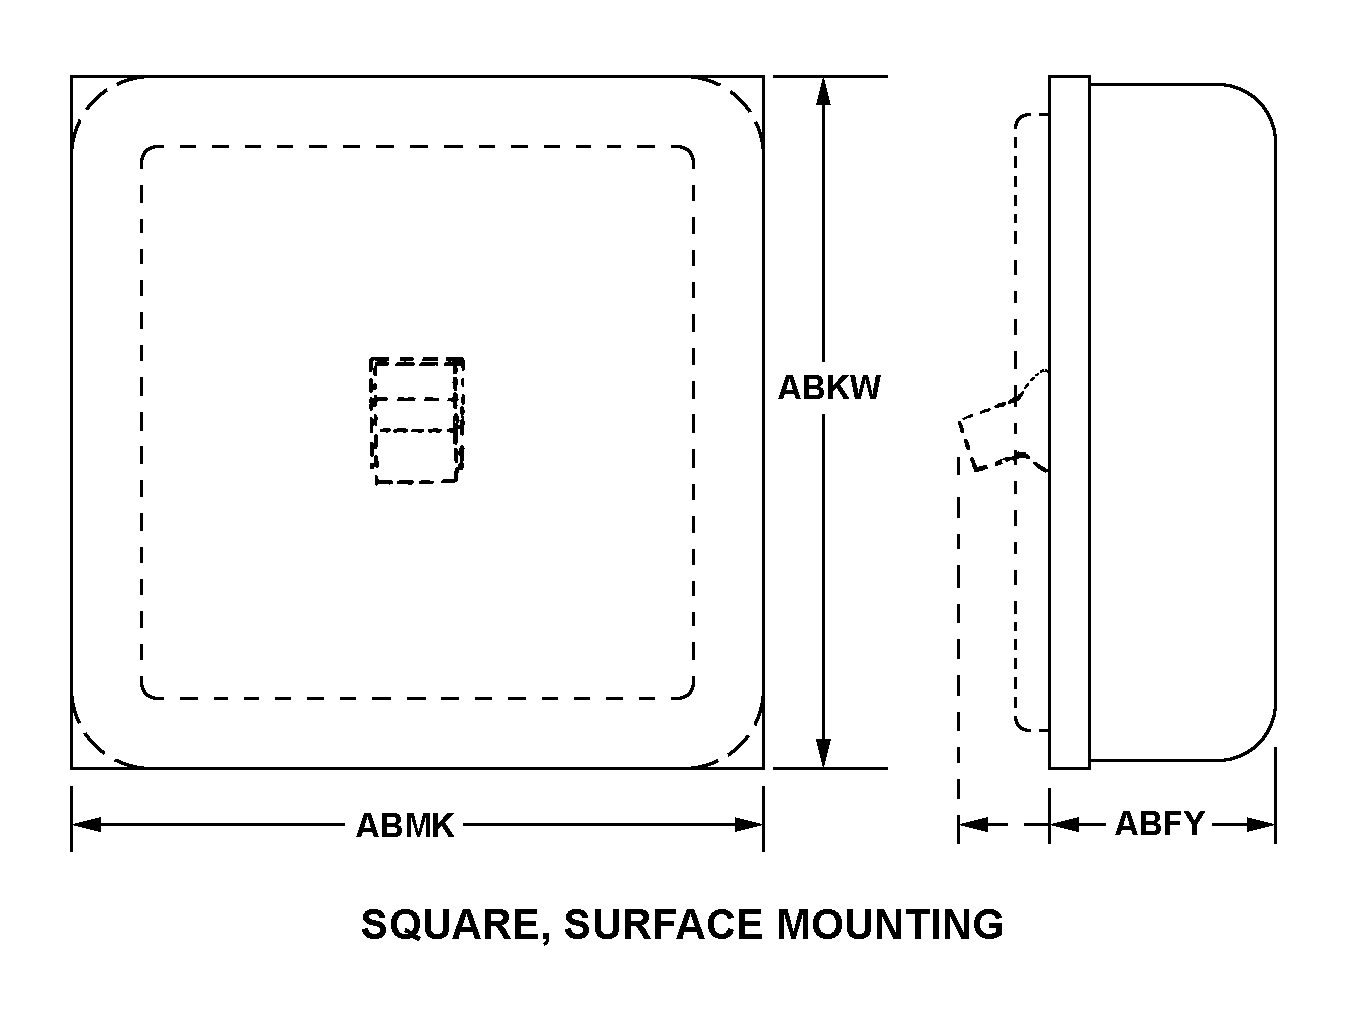 SQUARE, SURFACE MOUNTING style nsn 5940-01-333-9471